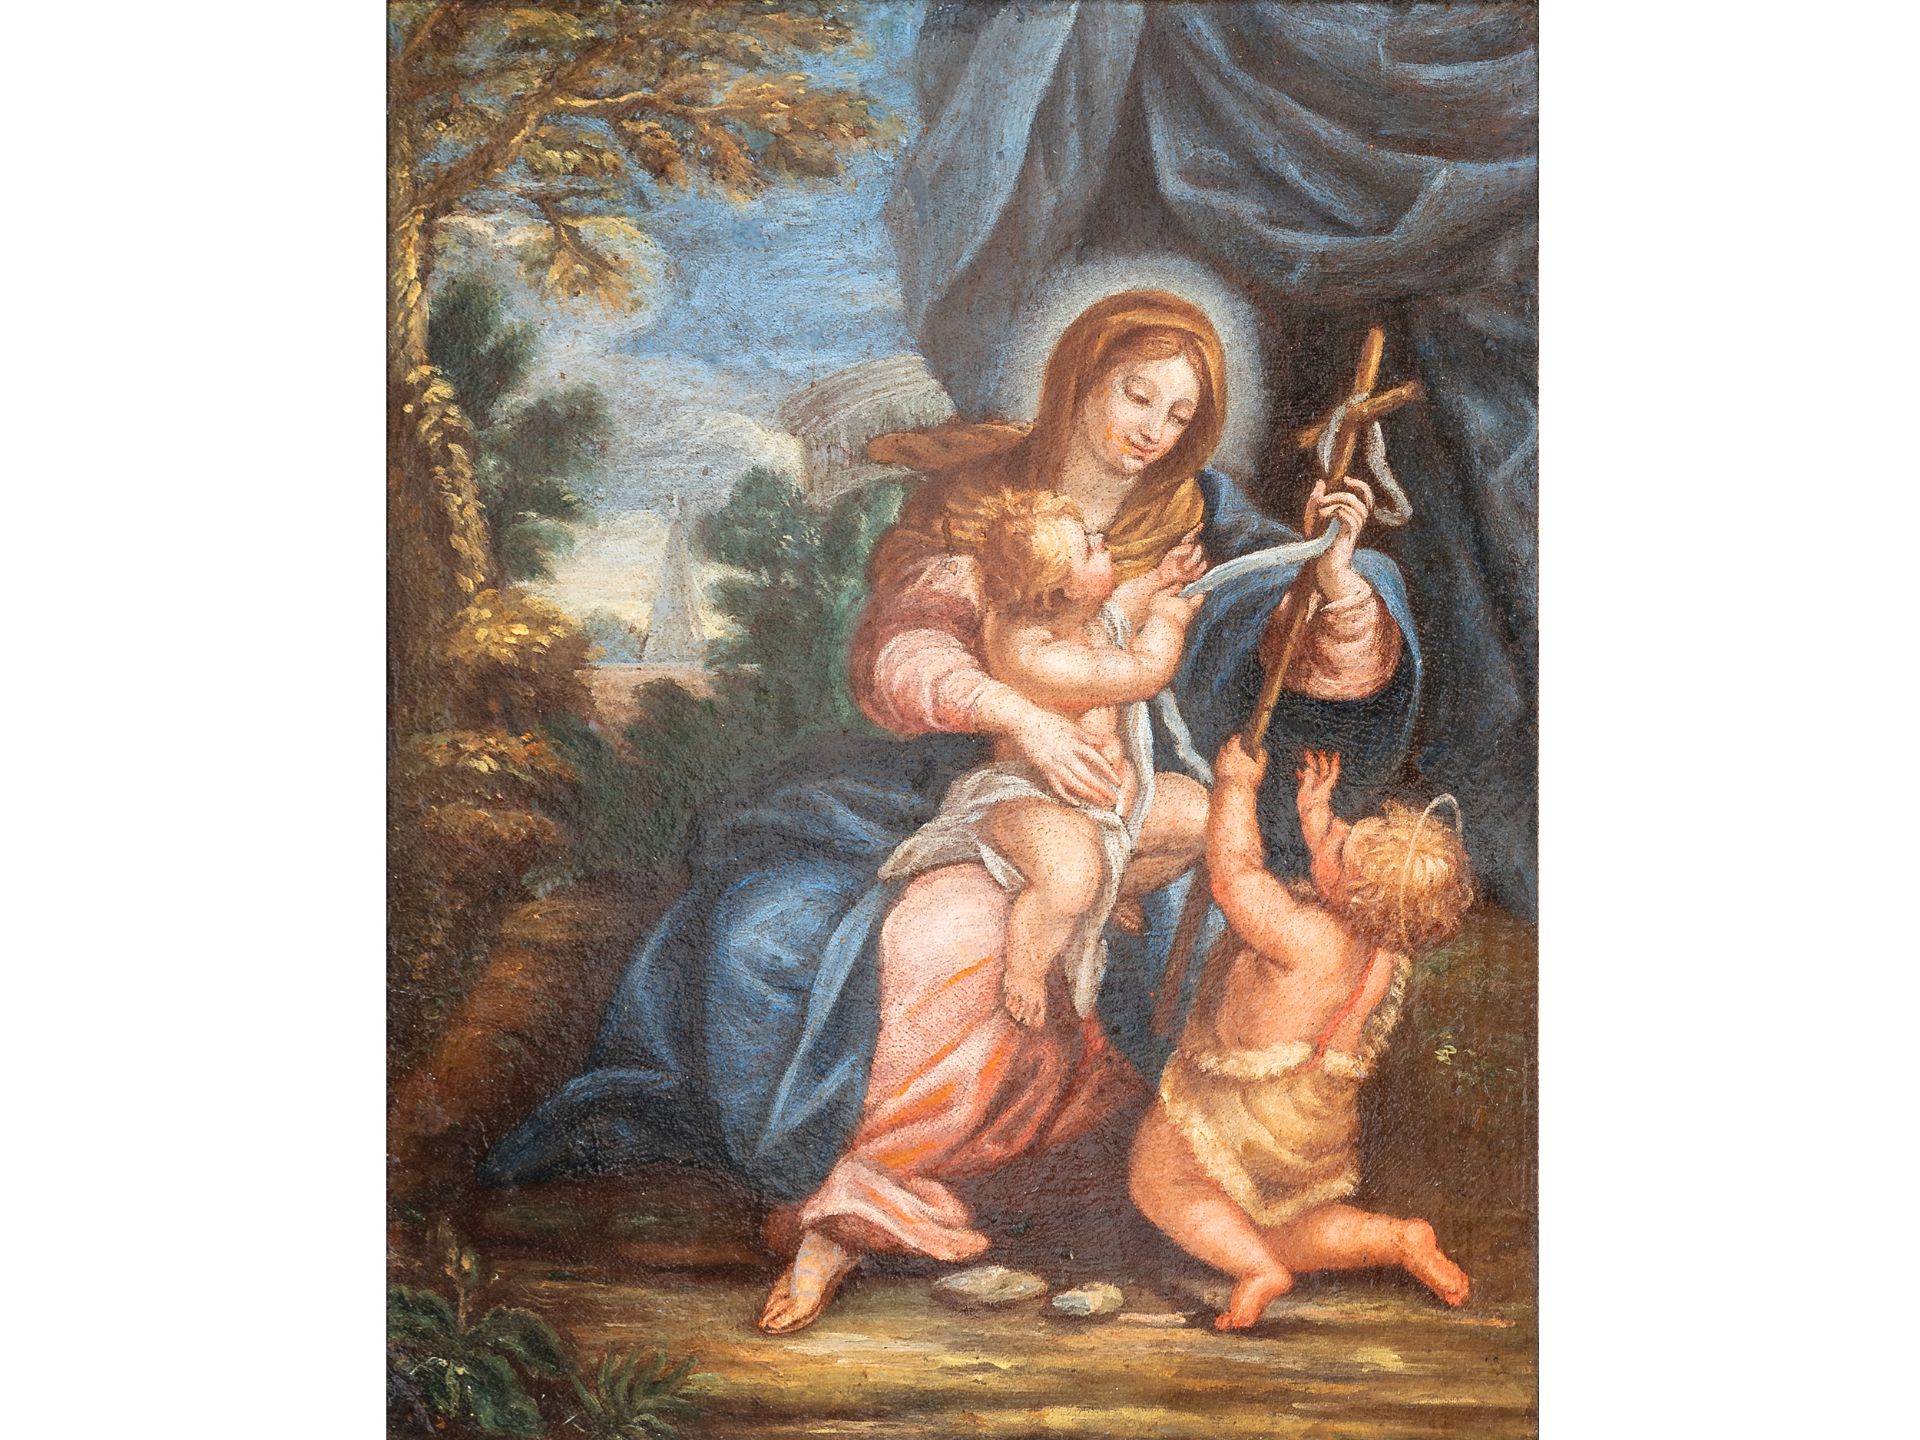 German School, 17th/18th century, Mary with Jesus and the Infant John